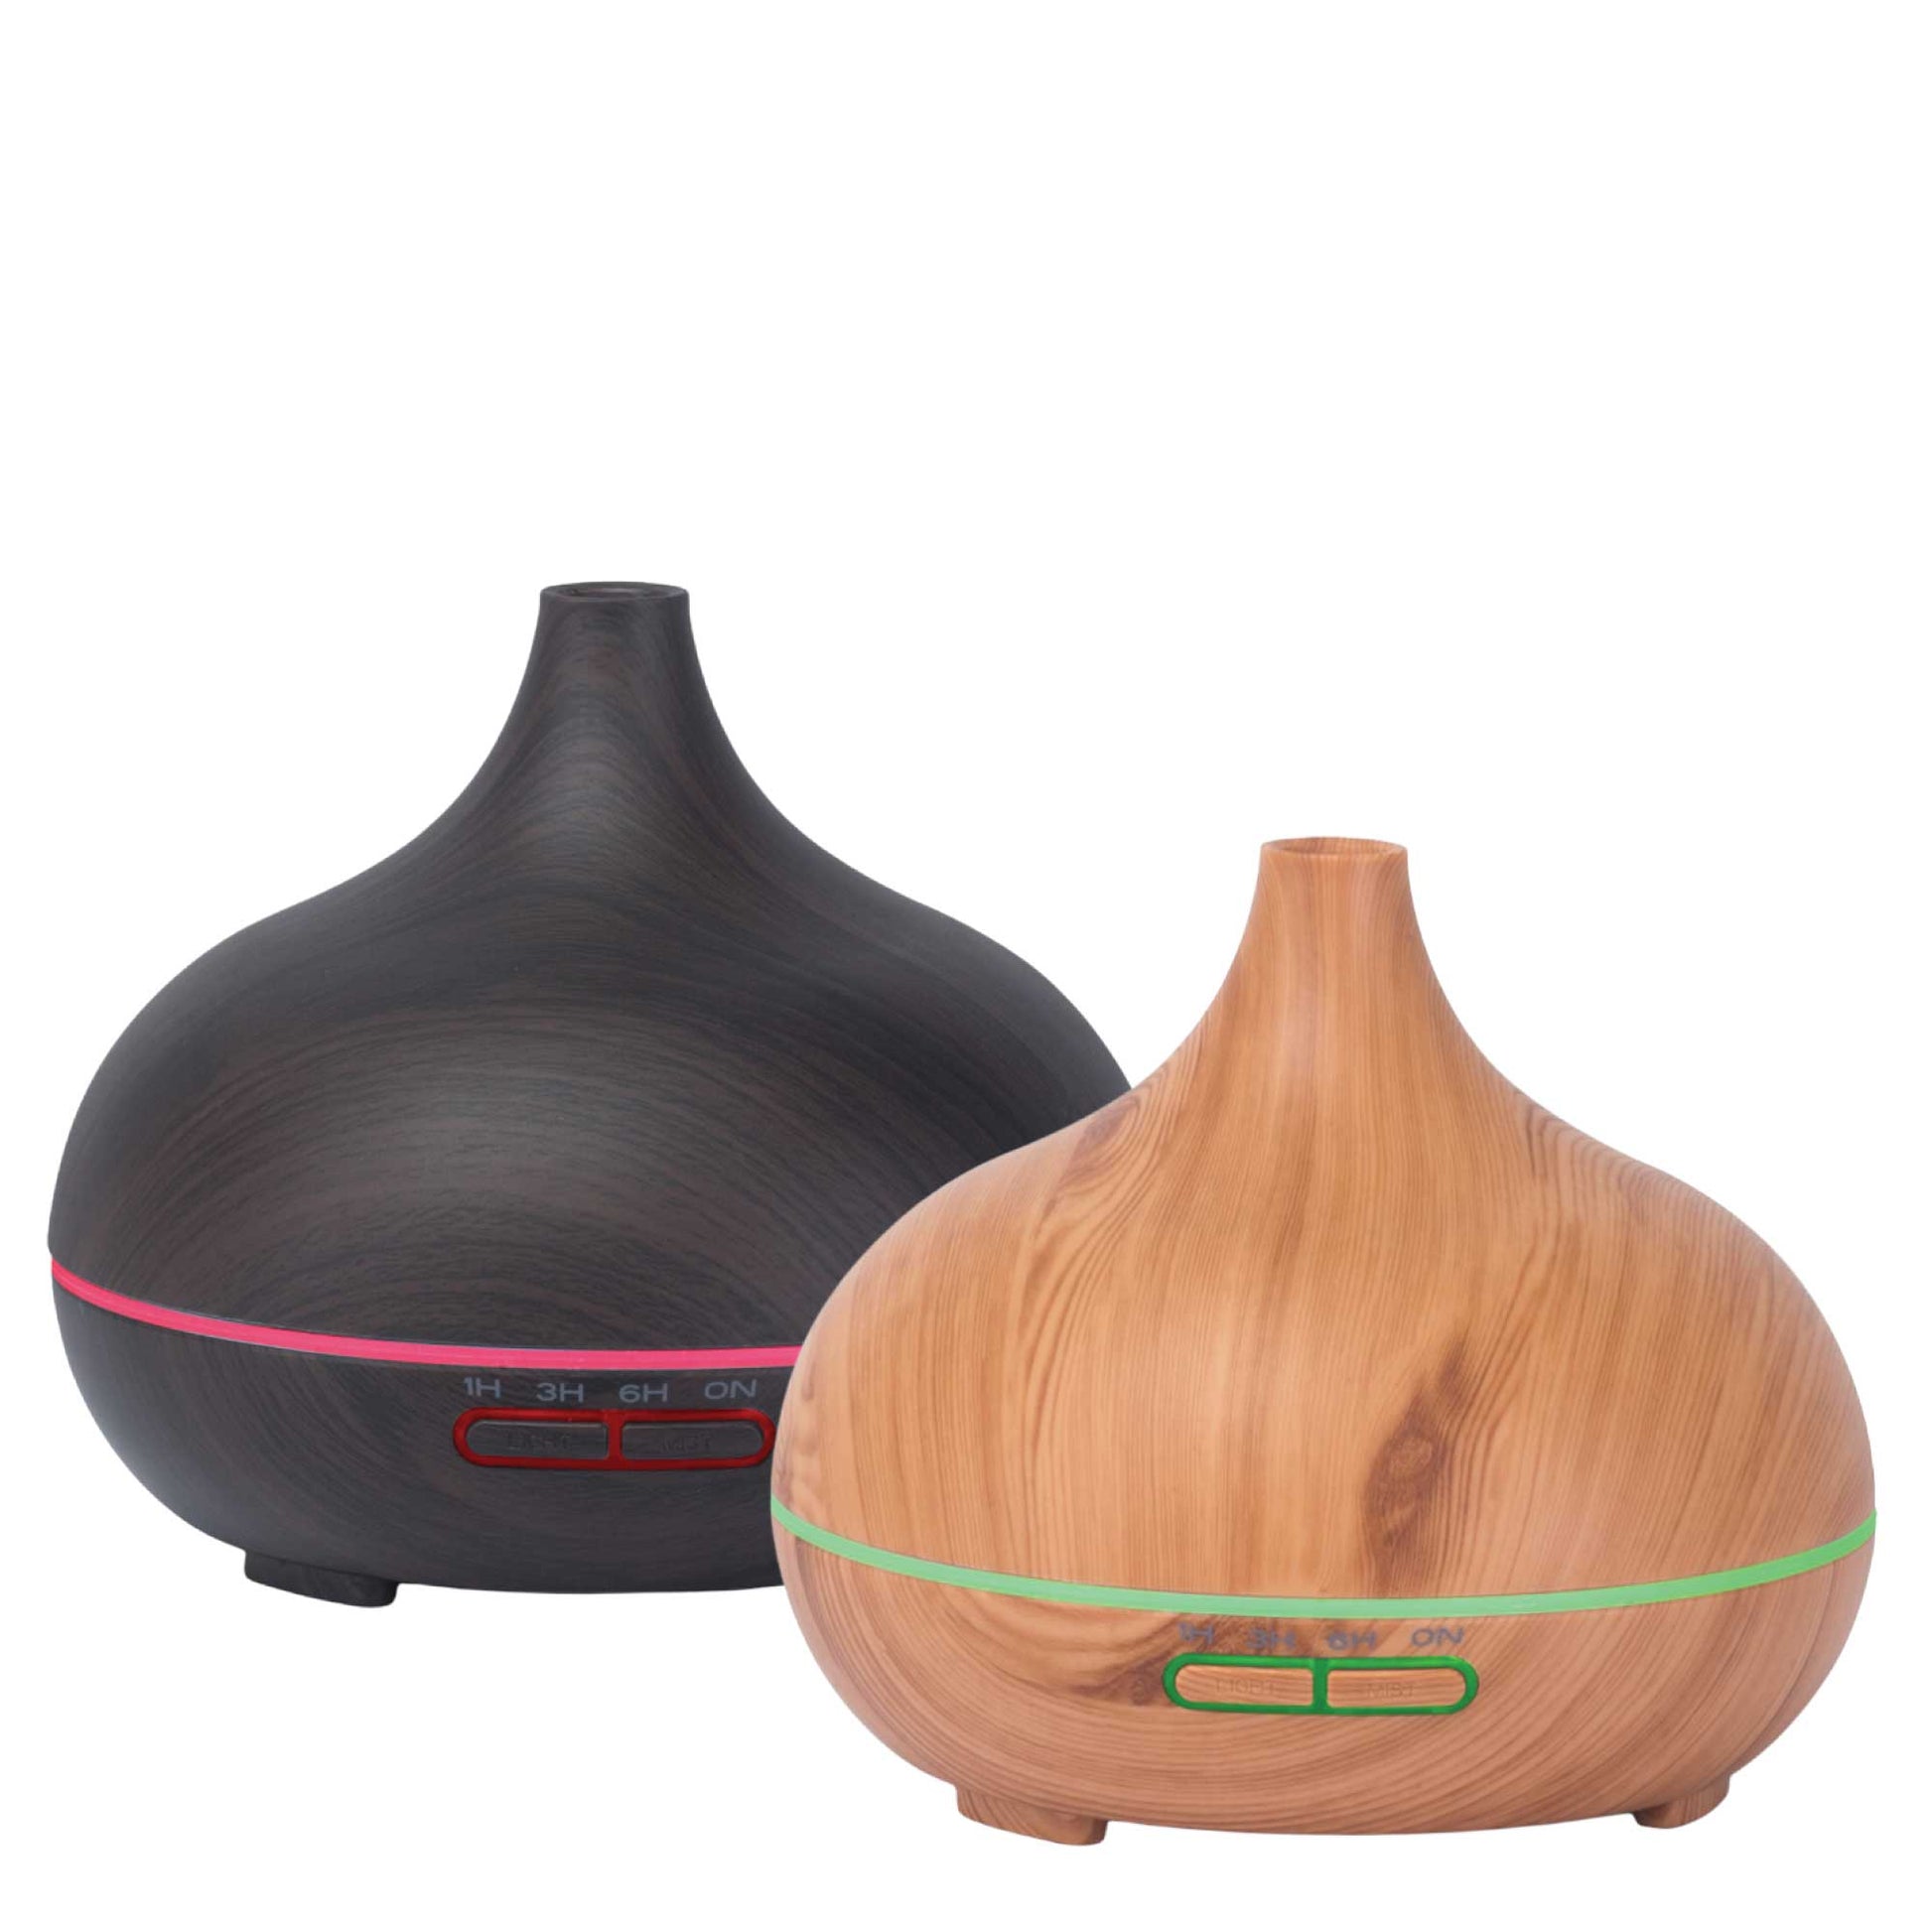 500ml Essential Oil Aroma Diffuser - Electric Aromatherapy Mist Humidifier